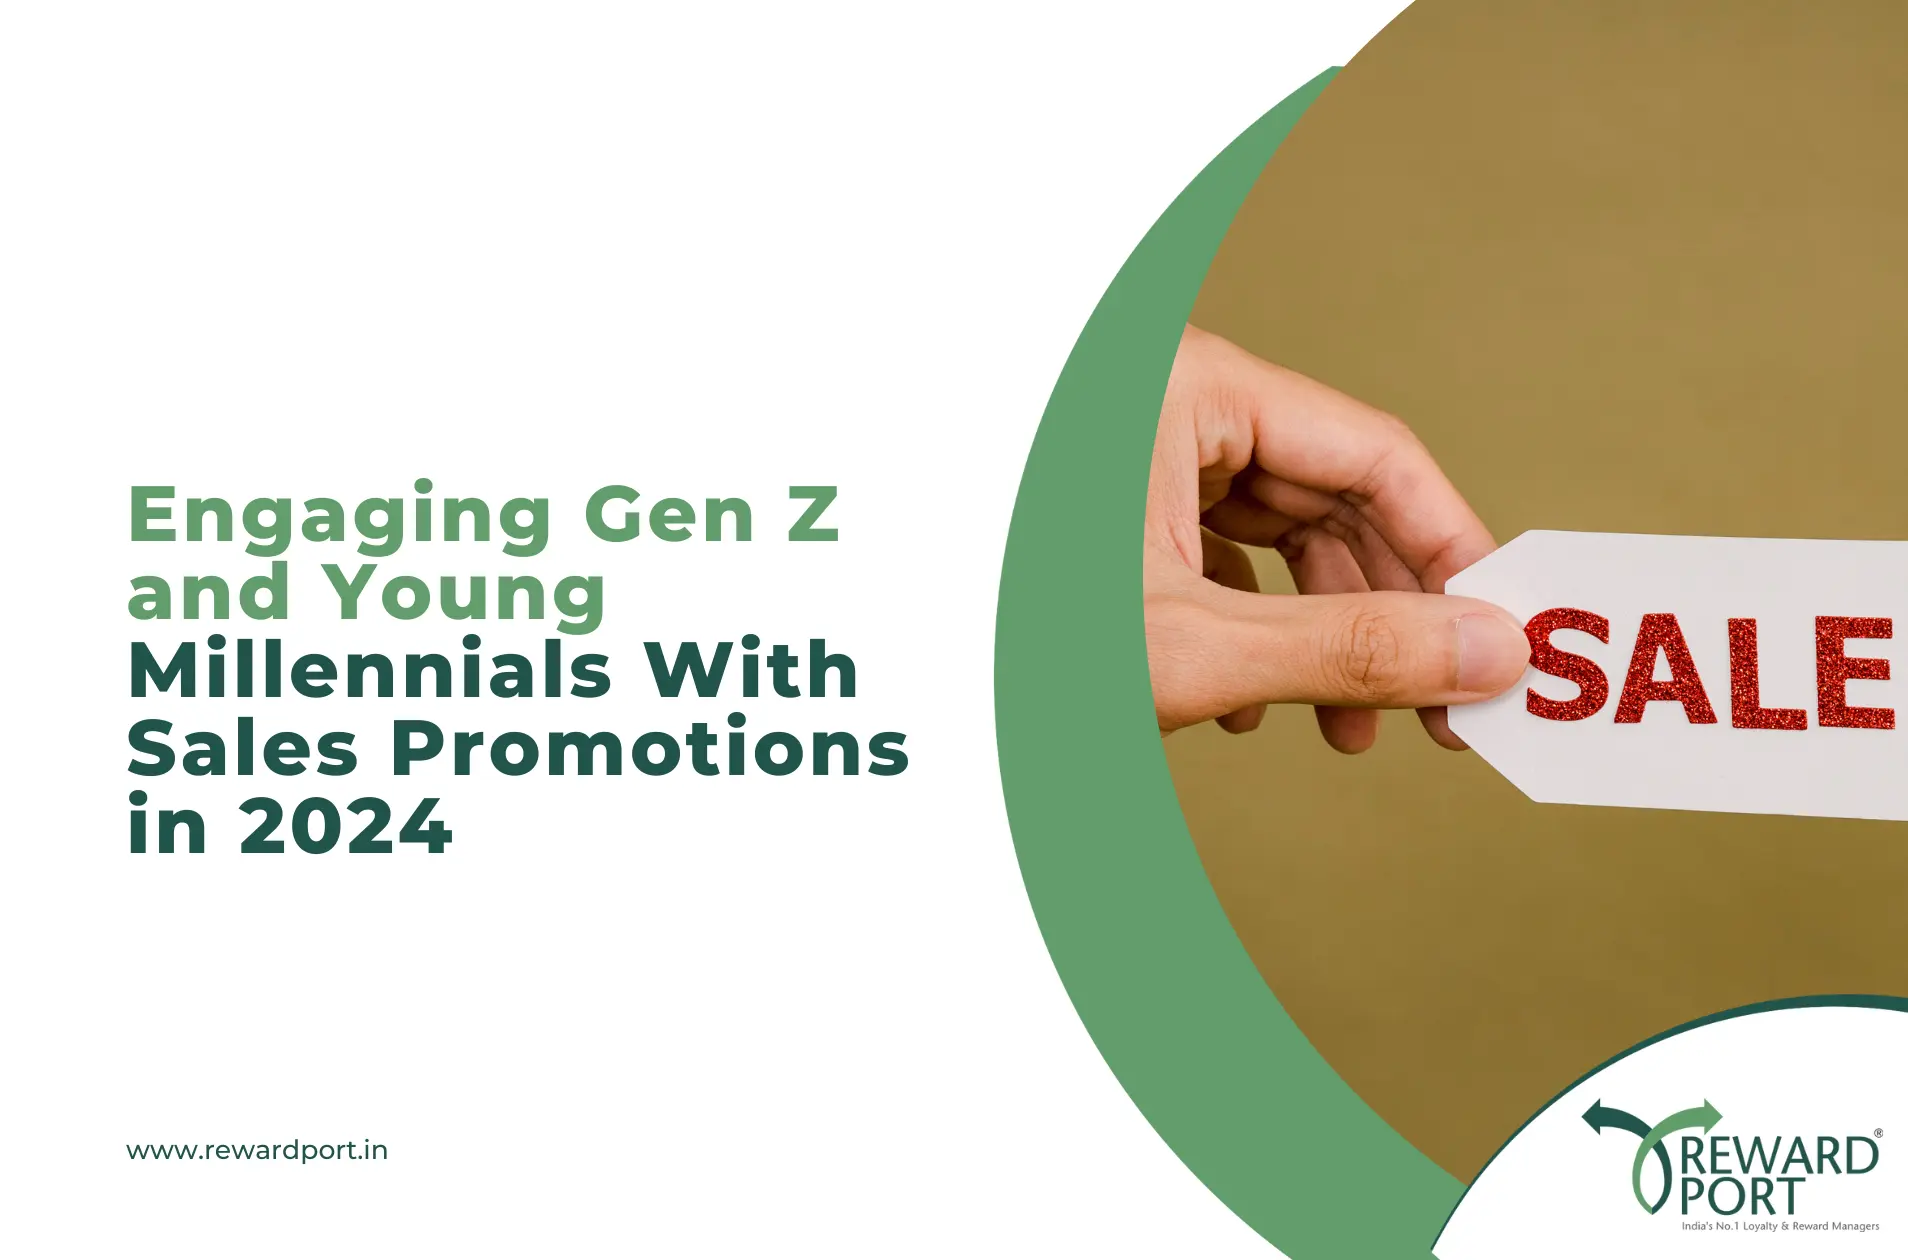 Engaging Gen Z and Young Millennials With Sales Promotions in 2024